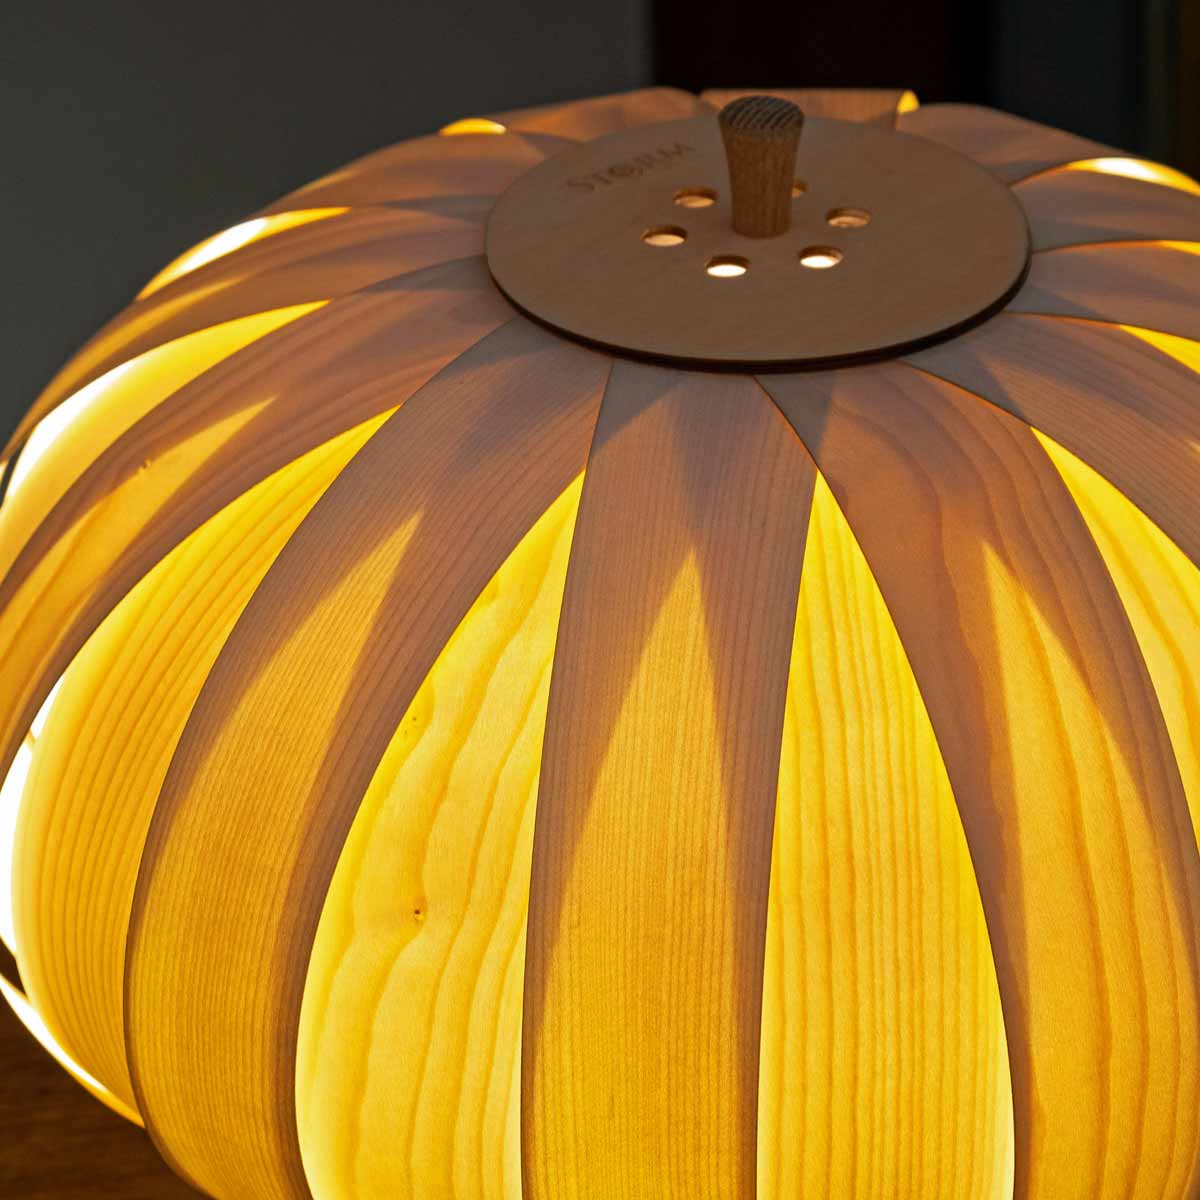 The Baby Bloom tripod lamp sold by South Charlotte Fine Lighting gives a warm glow